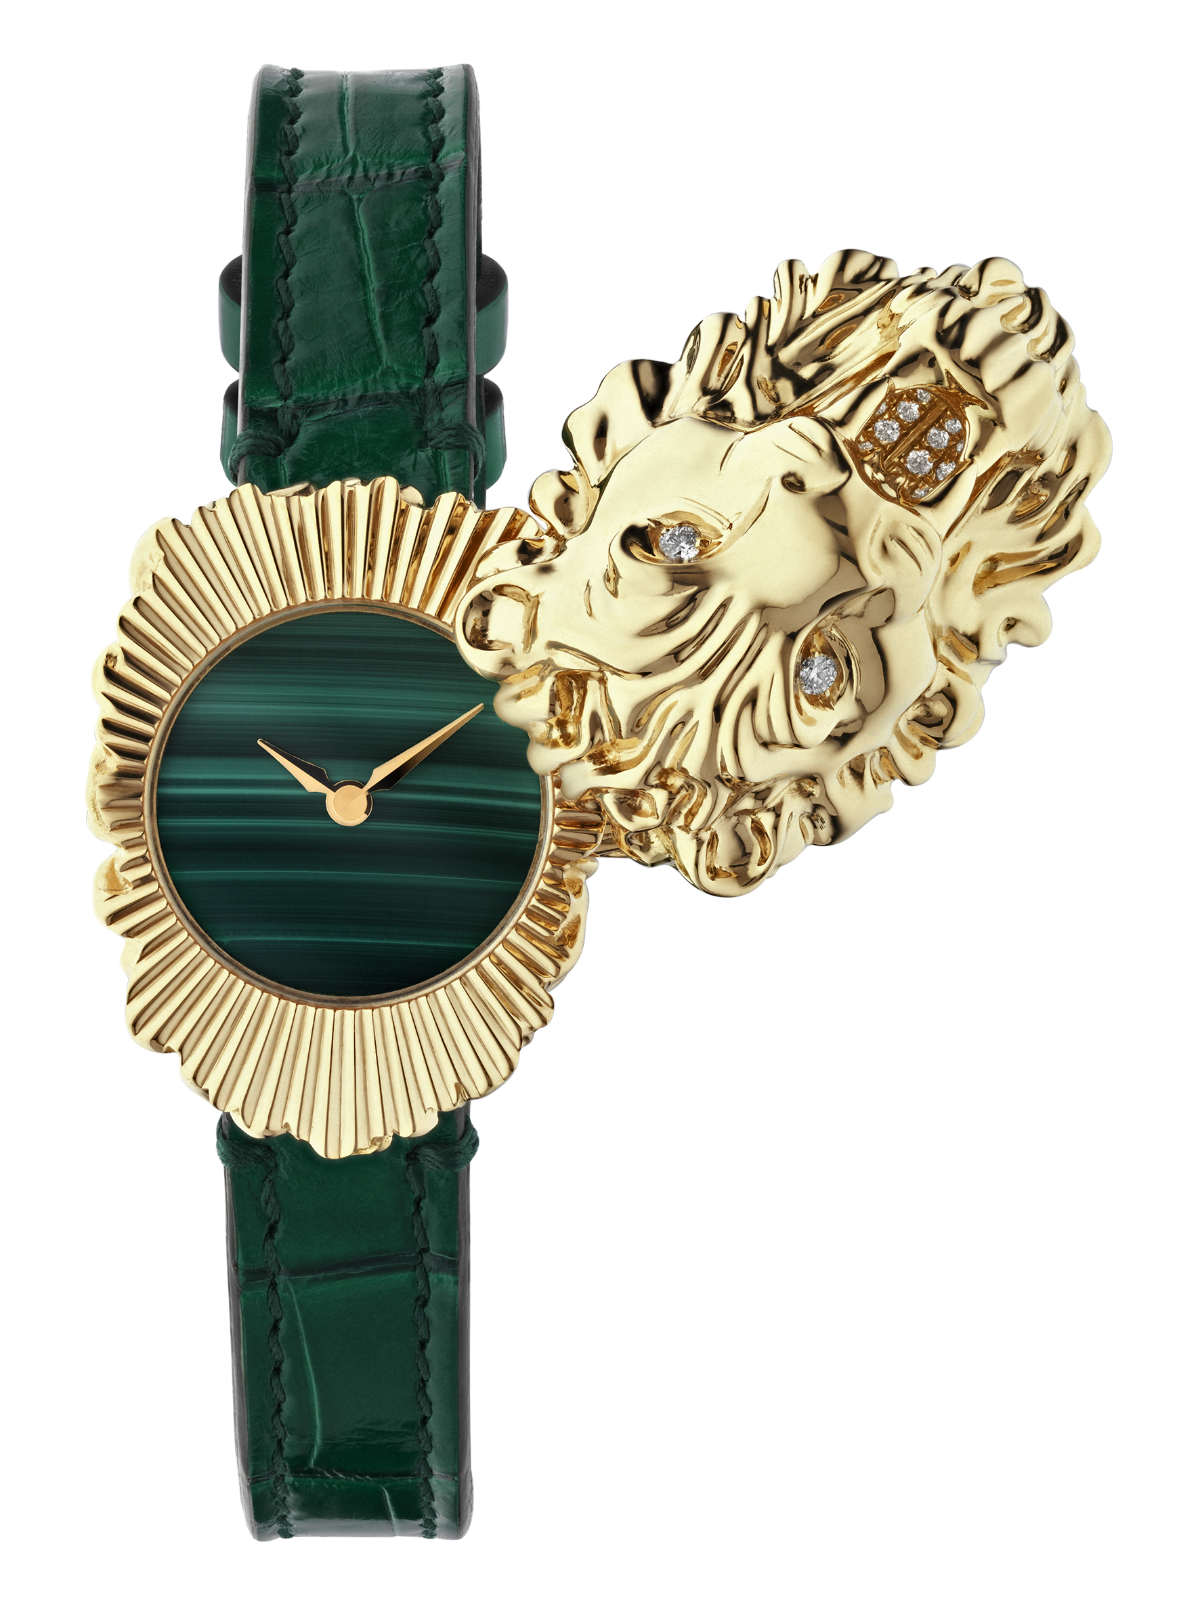 Gucci Presented The Lion Head, Dionysus And Gucci Play, An Array Of High Jewelry Watch Designs